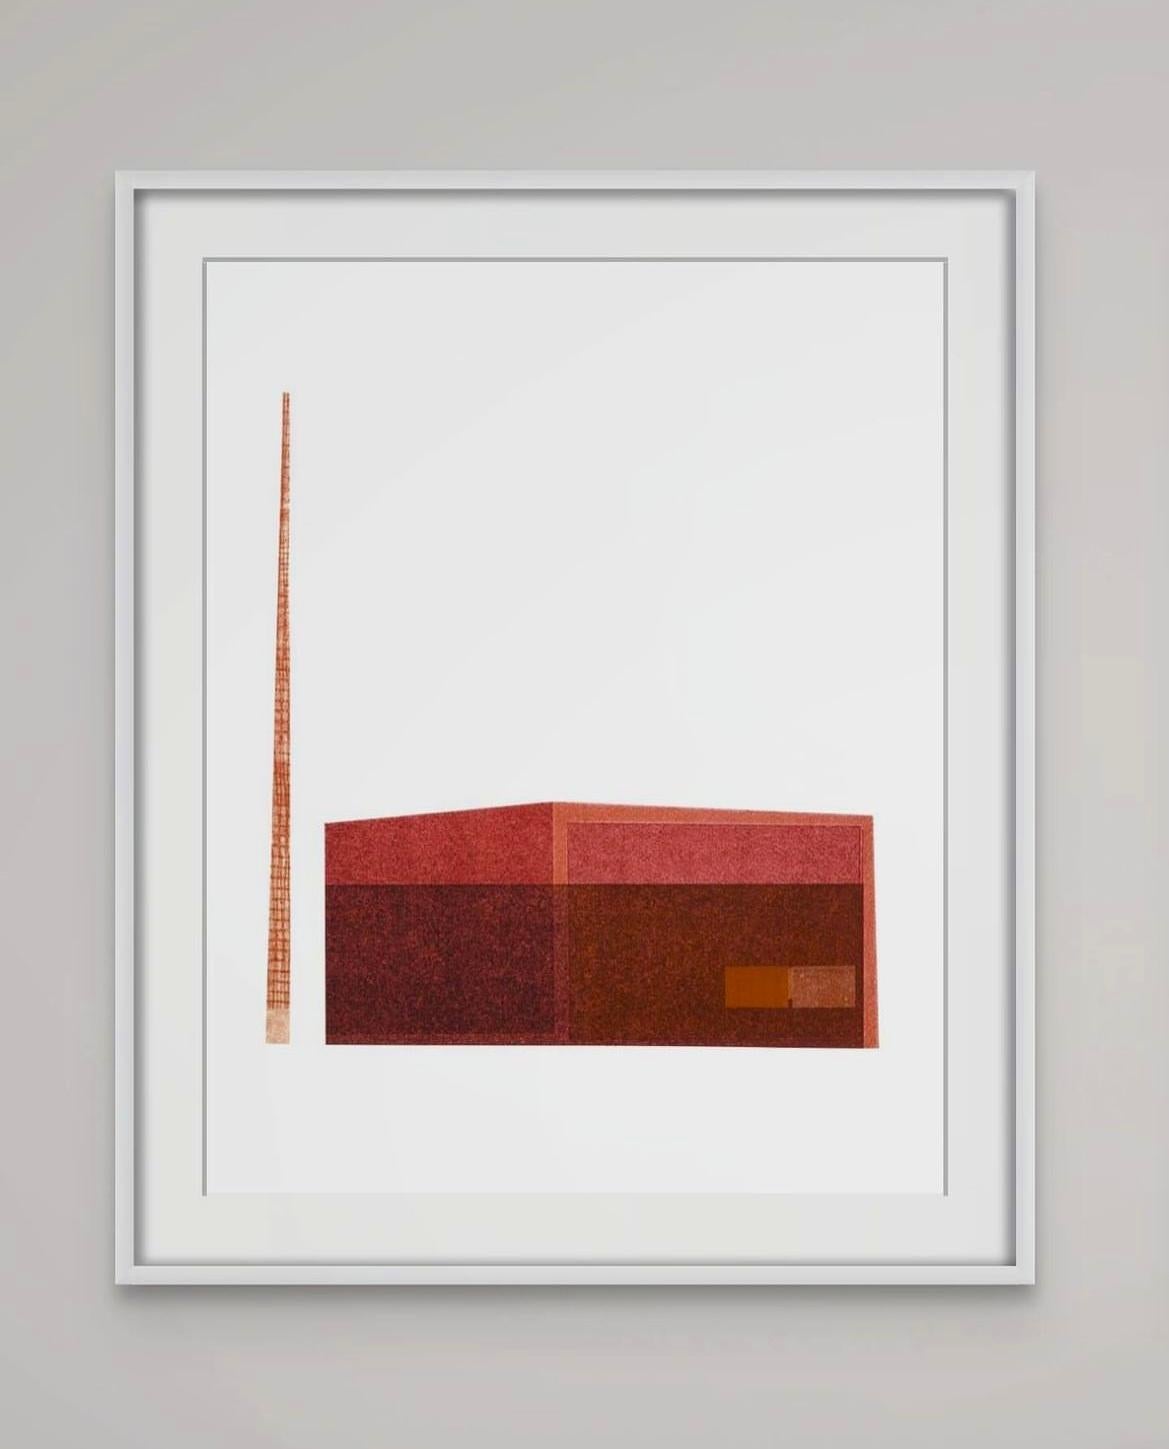 Power Station: modernist urban architectural collage on monoprint in red, framed - Print by Agathe Bouton